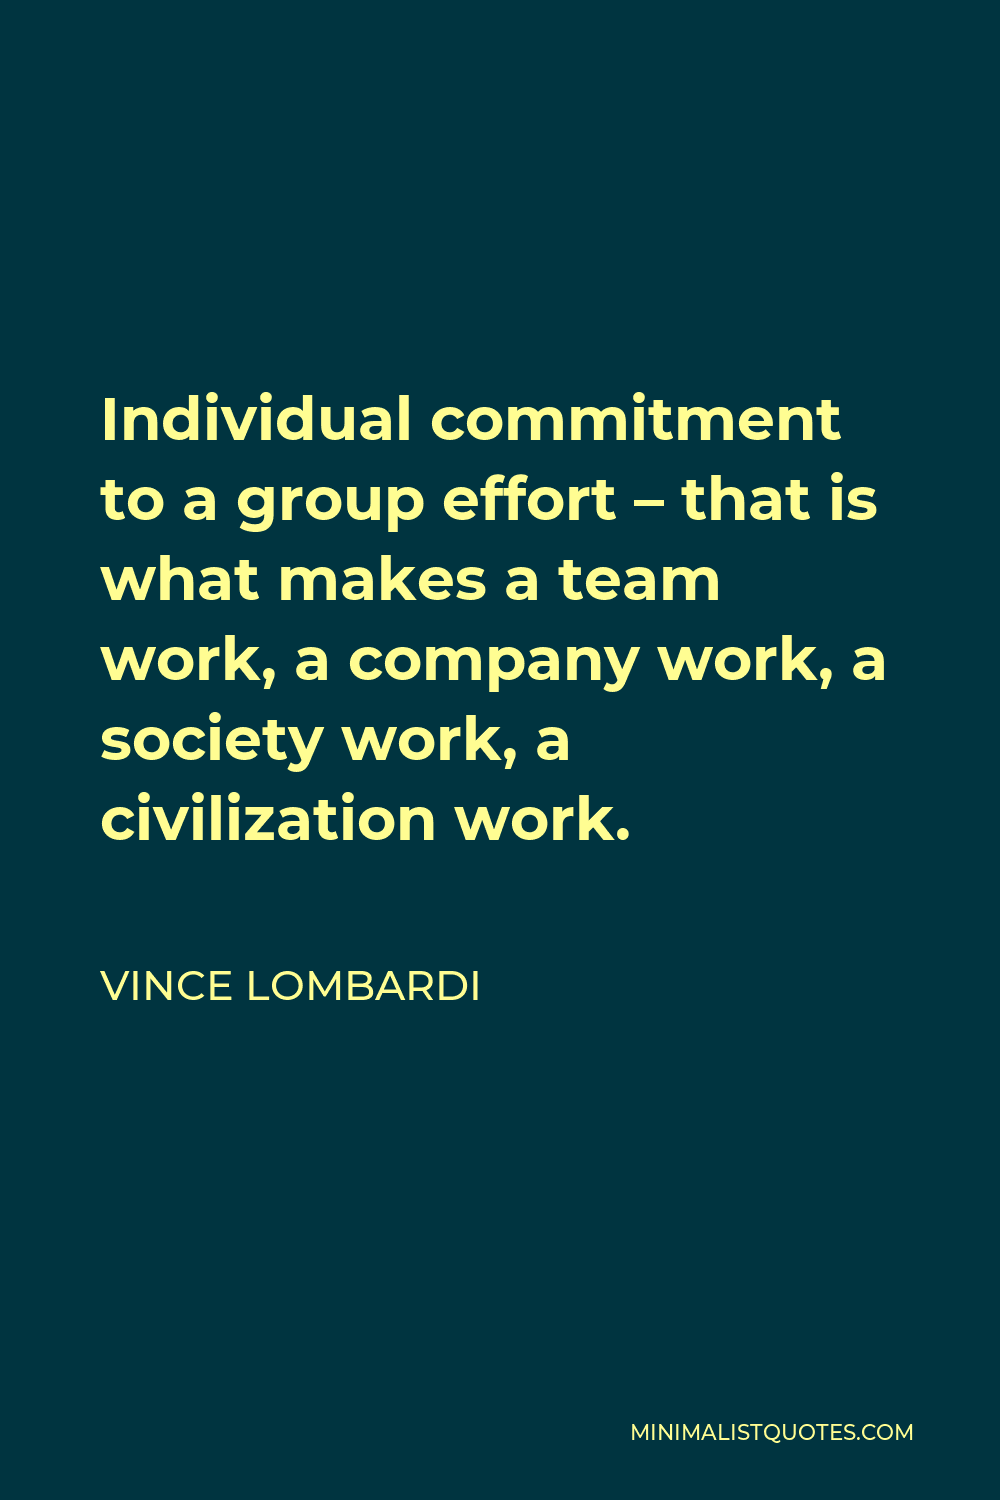 Vince Lombardi Quote - Individual commitment to a group effort – that is what makes a team work, a company work, a society work, a civilization work.